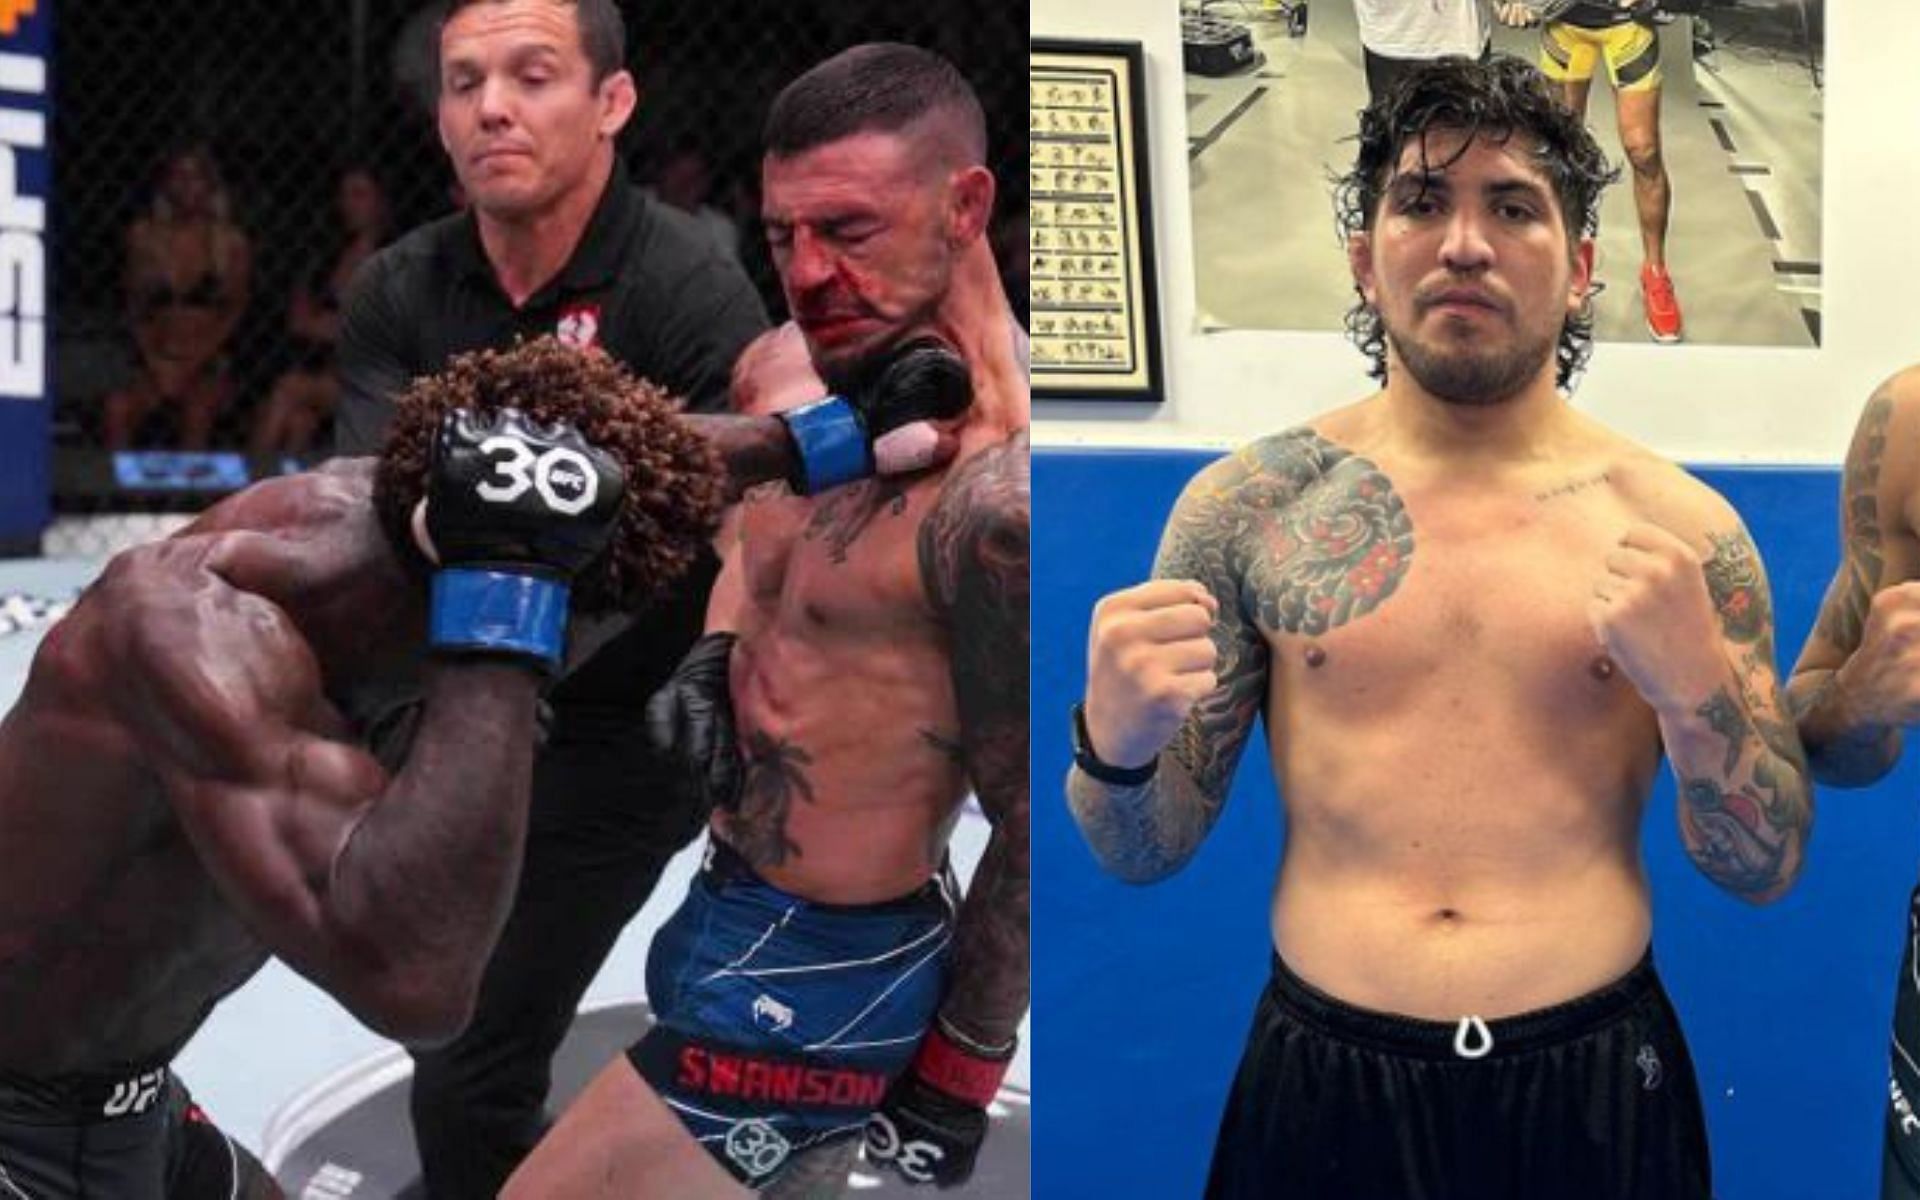 UFC Vegas 78 (left) and Dillon Danis (right) (Image credits @LewisSimpsonMMA on Twitter and @dillondanis on instagram)